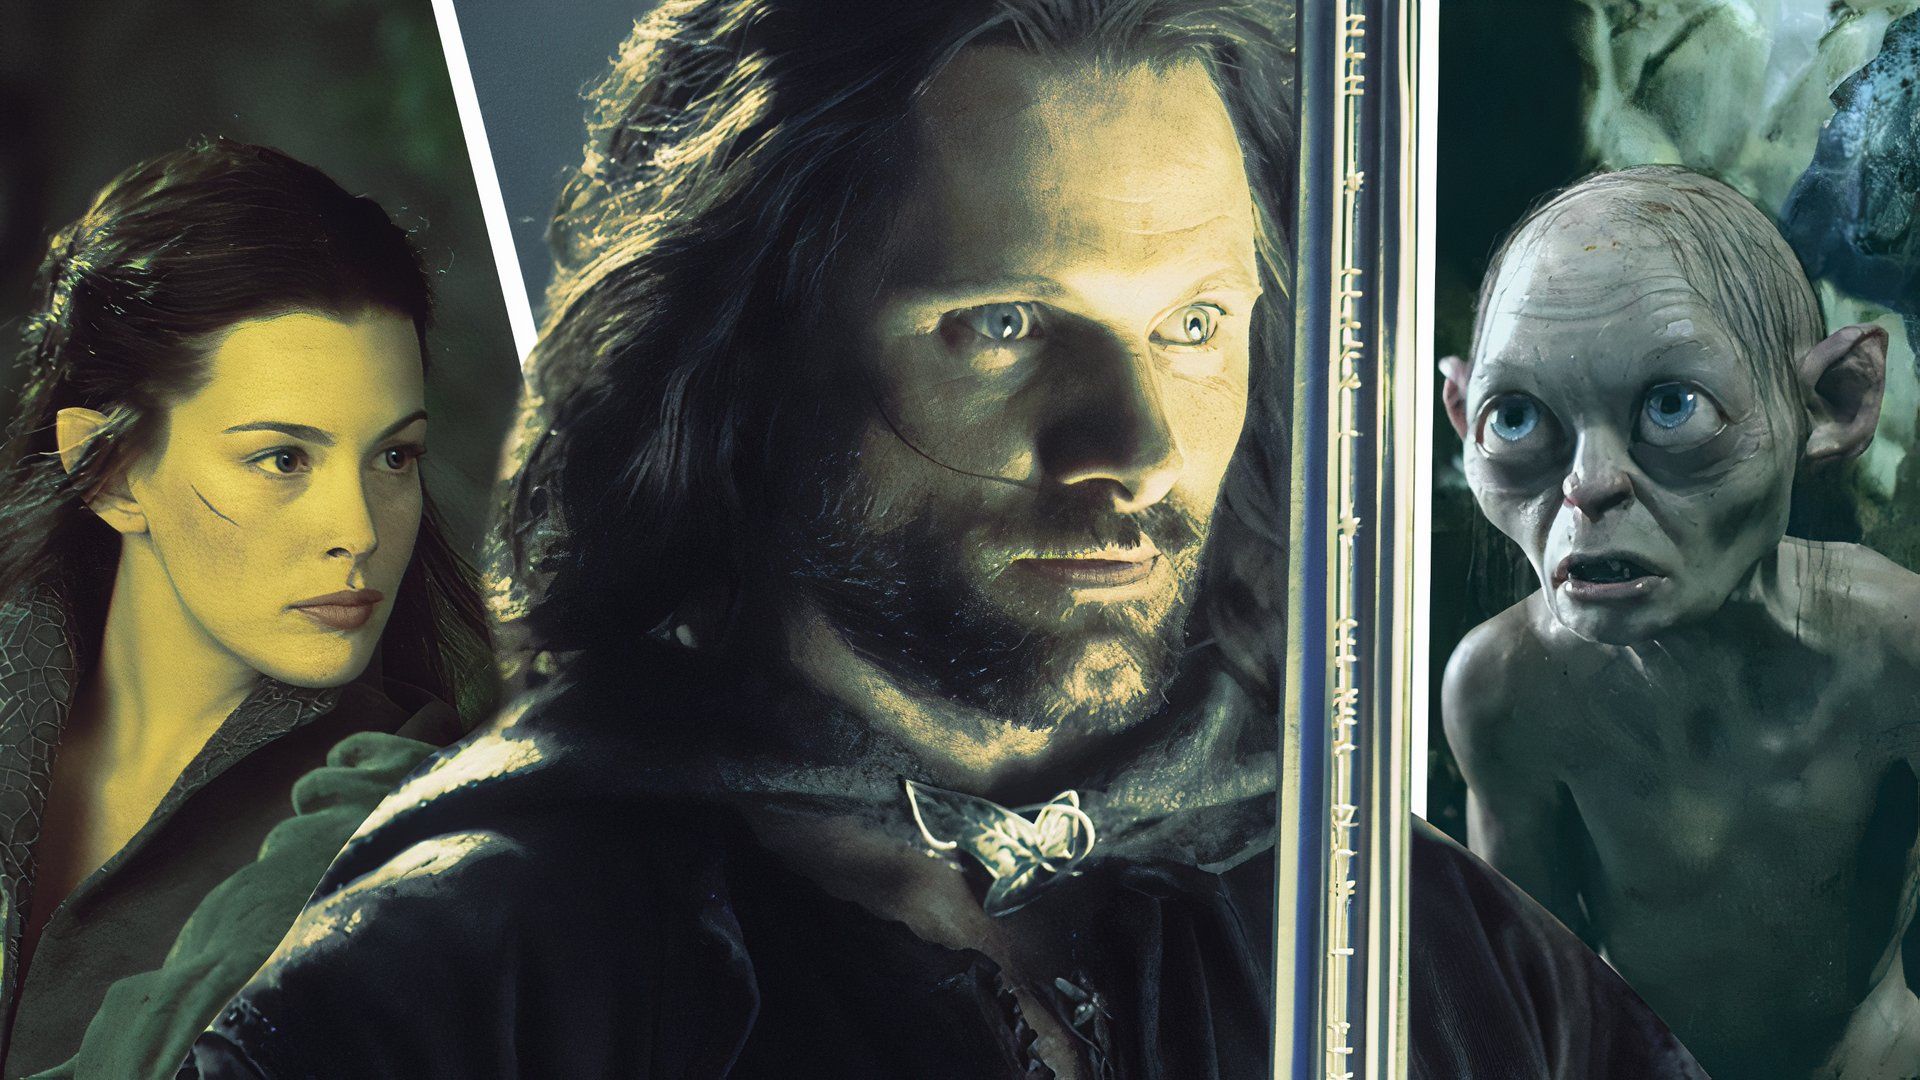 An edited image of Viggo Mortensen as Aragorn, Liv Tyler as Arwen, and Andy Serkis as Gollum in The Lord of the Rings